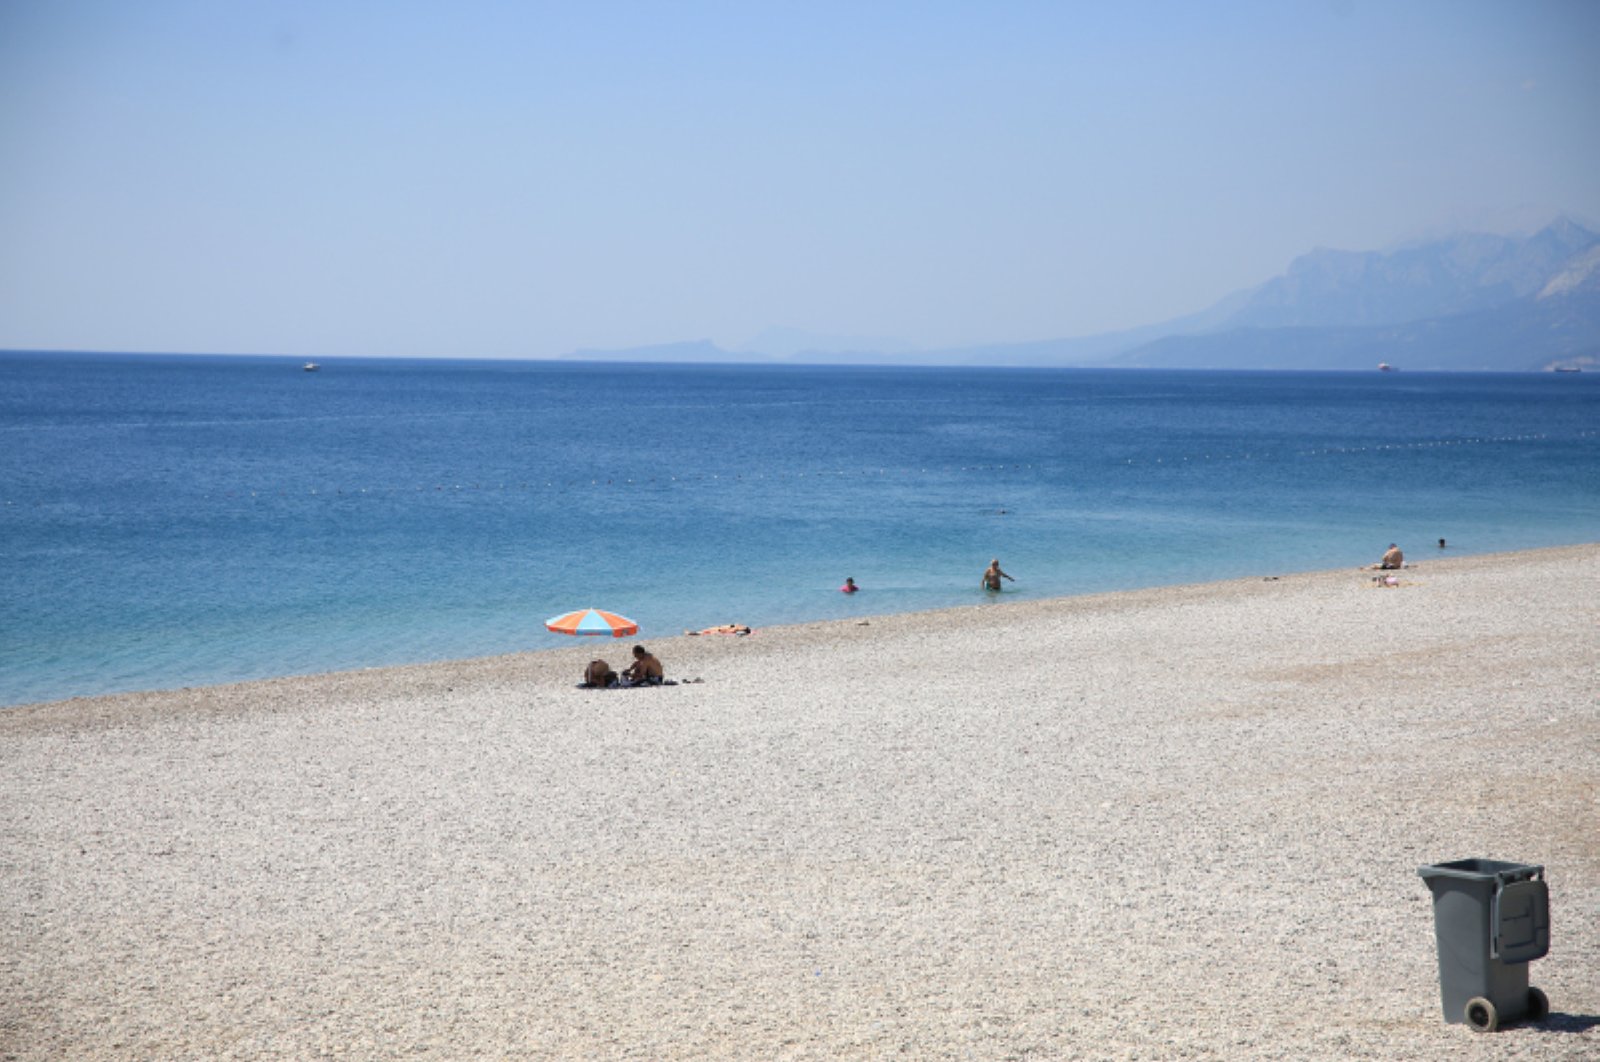 A beach looks deserted in southern Antalya province during the curfew implemented for the nationwide university entrance exams, June 27, 2020. (AA Photo)